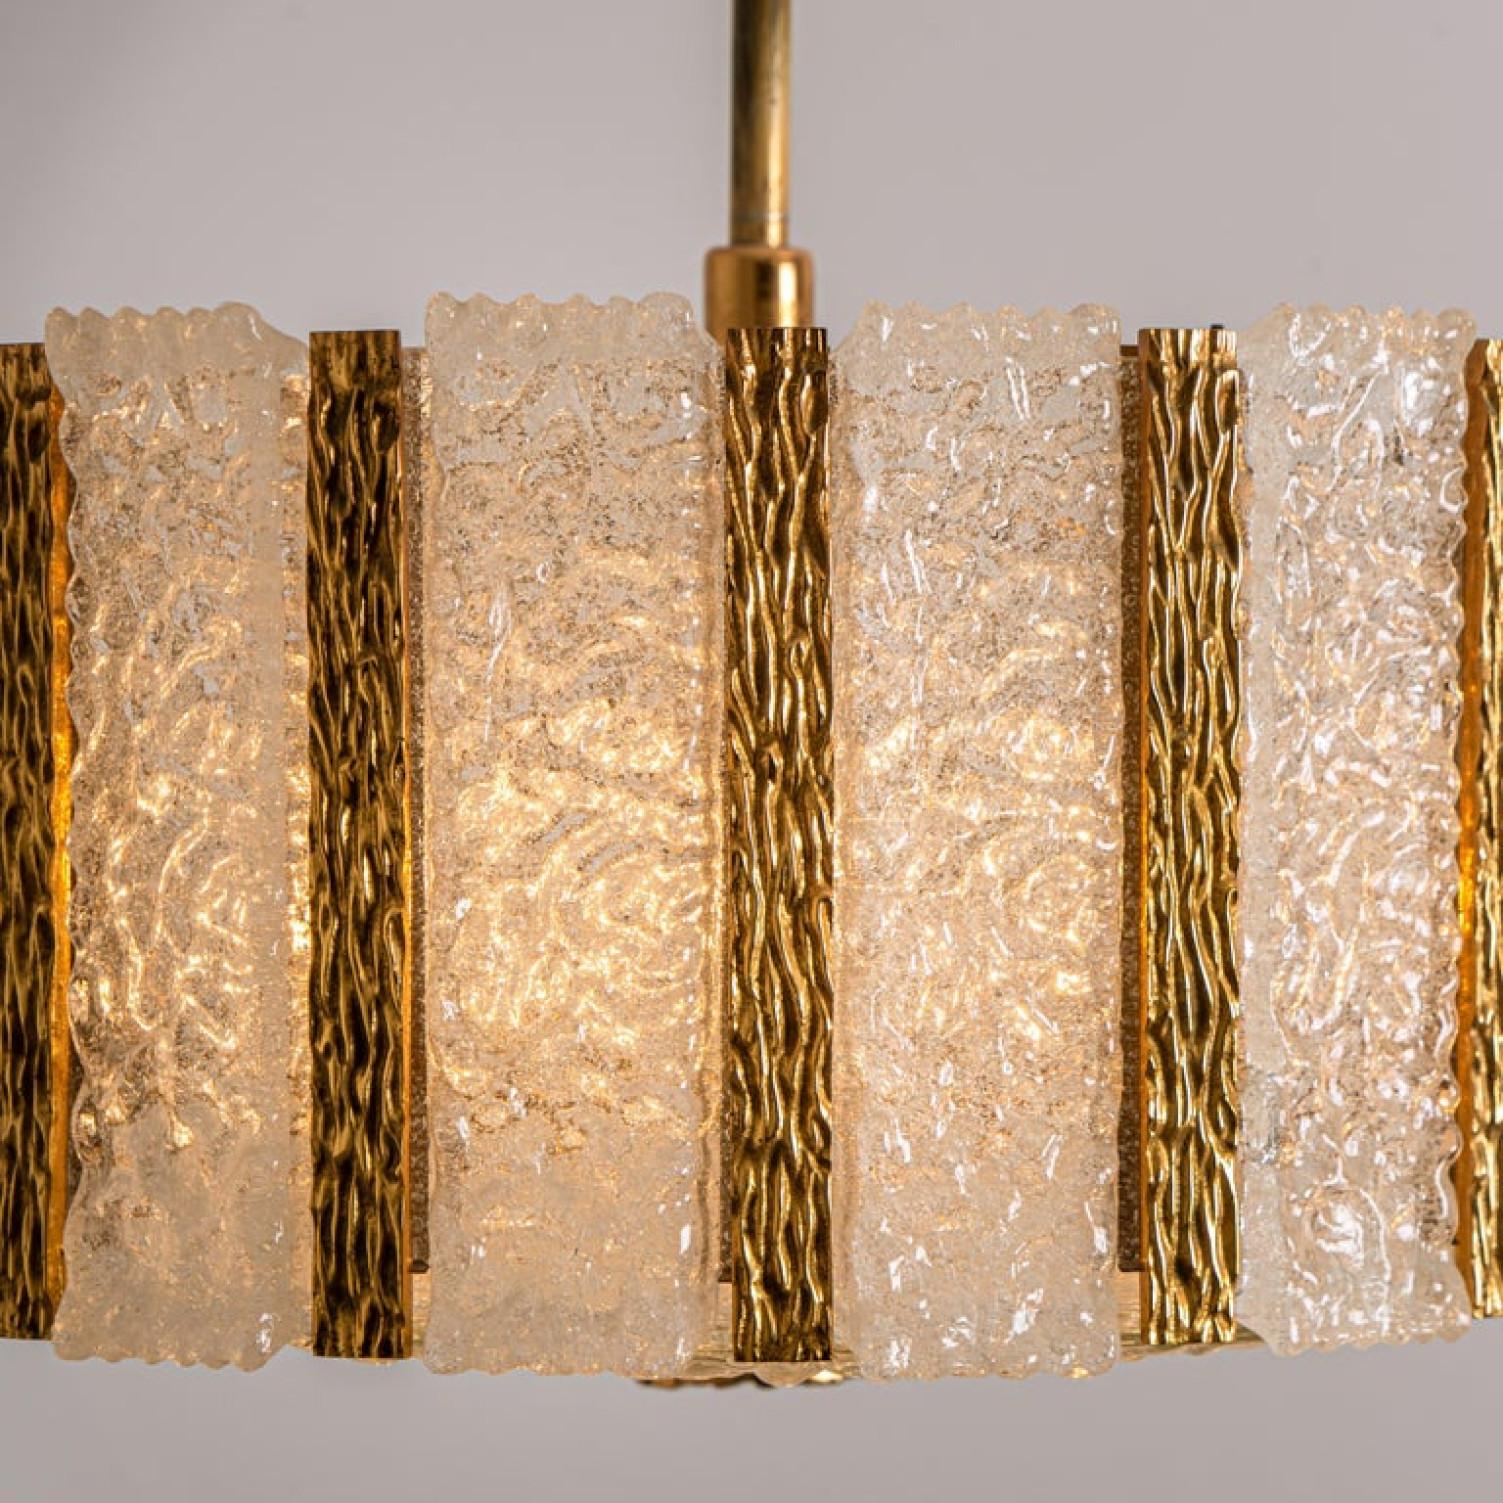 Pair of Gold-Plated Bronze Drum Light Fixtures, 1960s, Austria For Sale 3